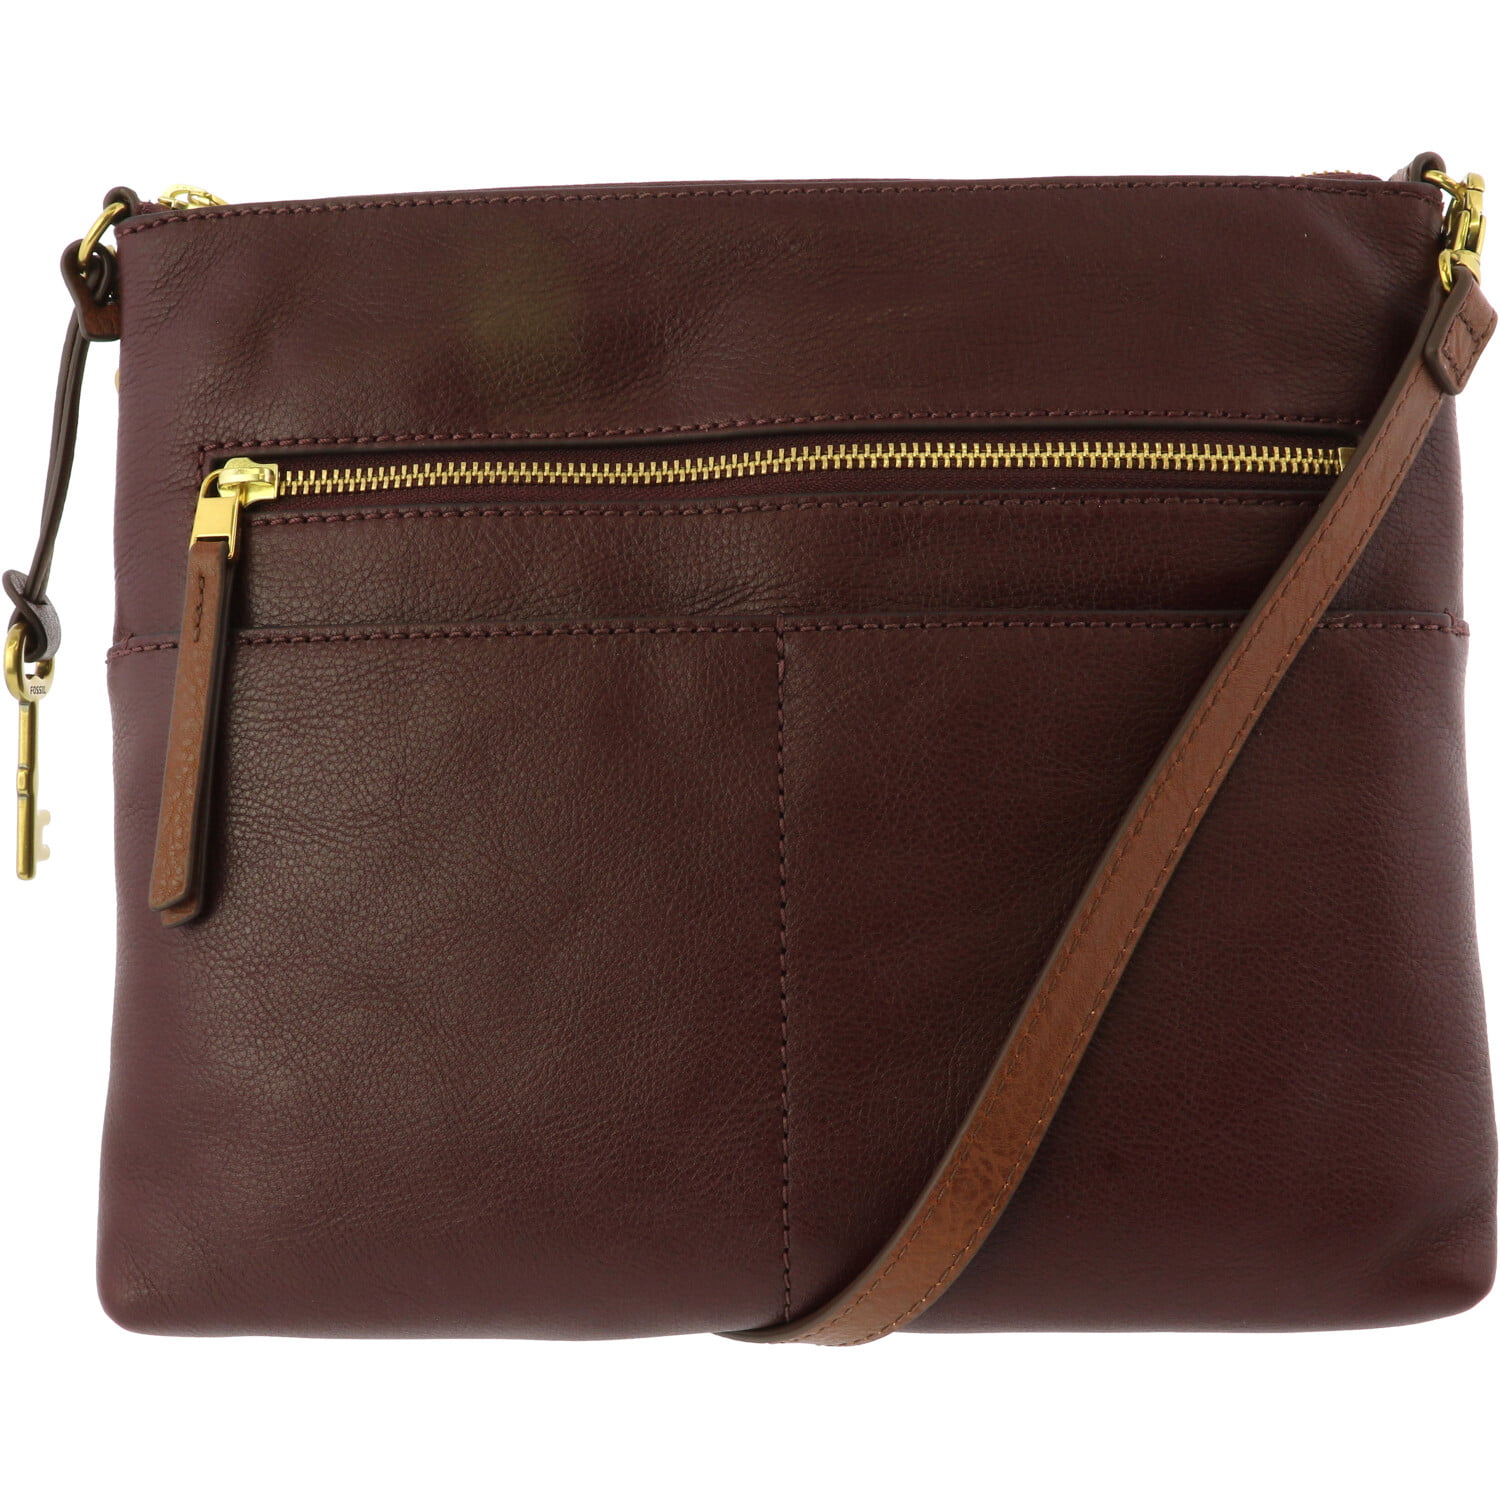 Fossil Women's Fiona Large Crossbody Leather Cross Body Bag - Fig ...